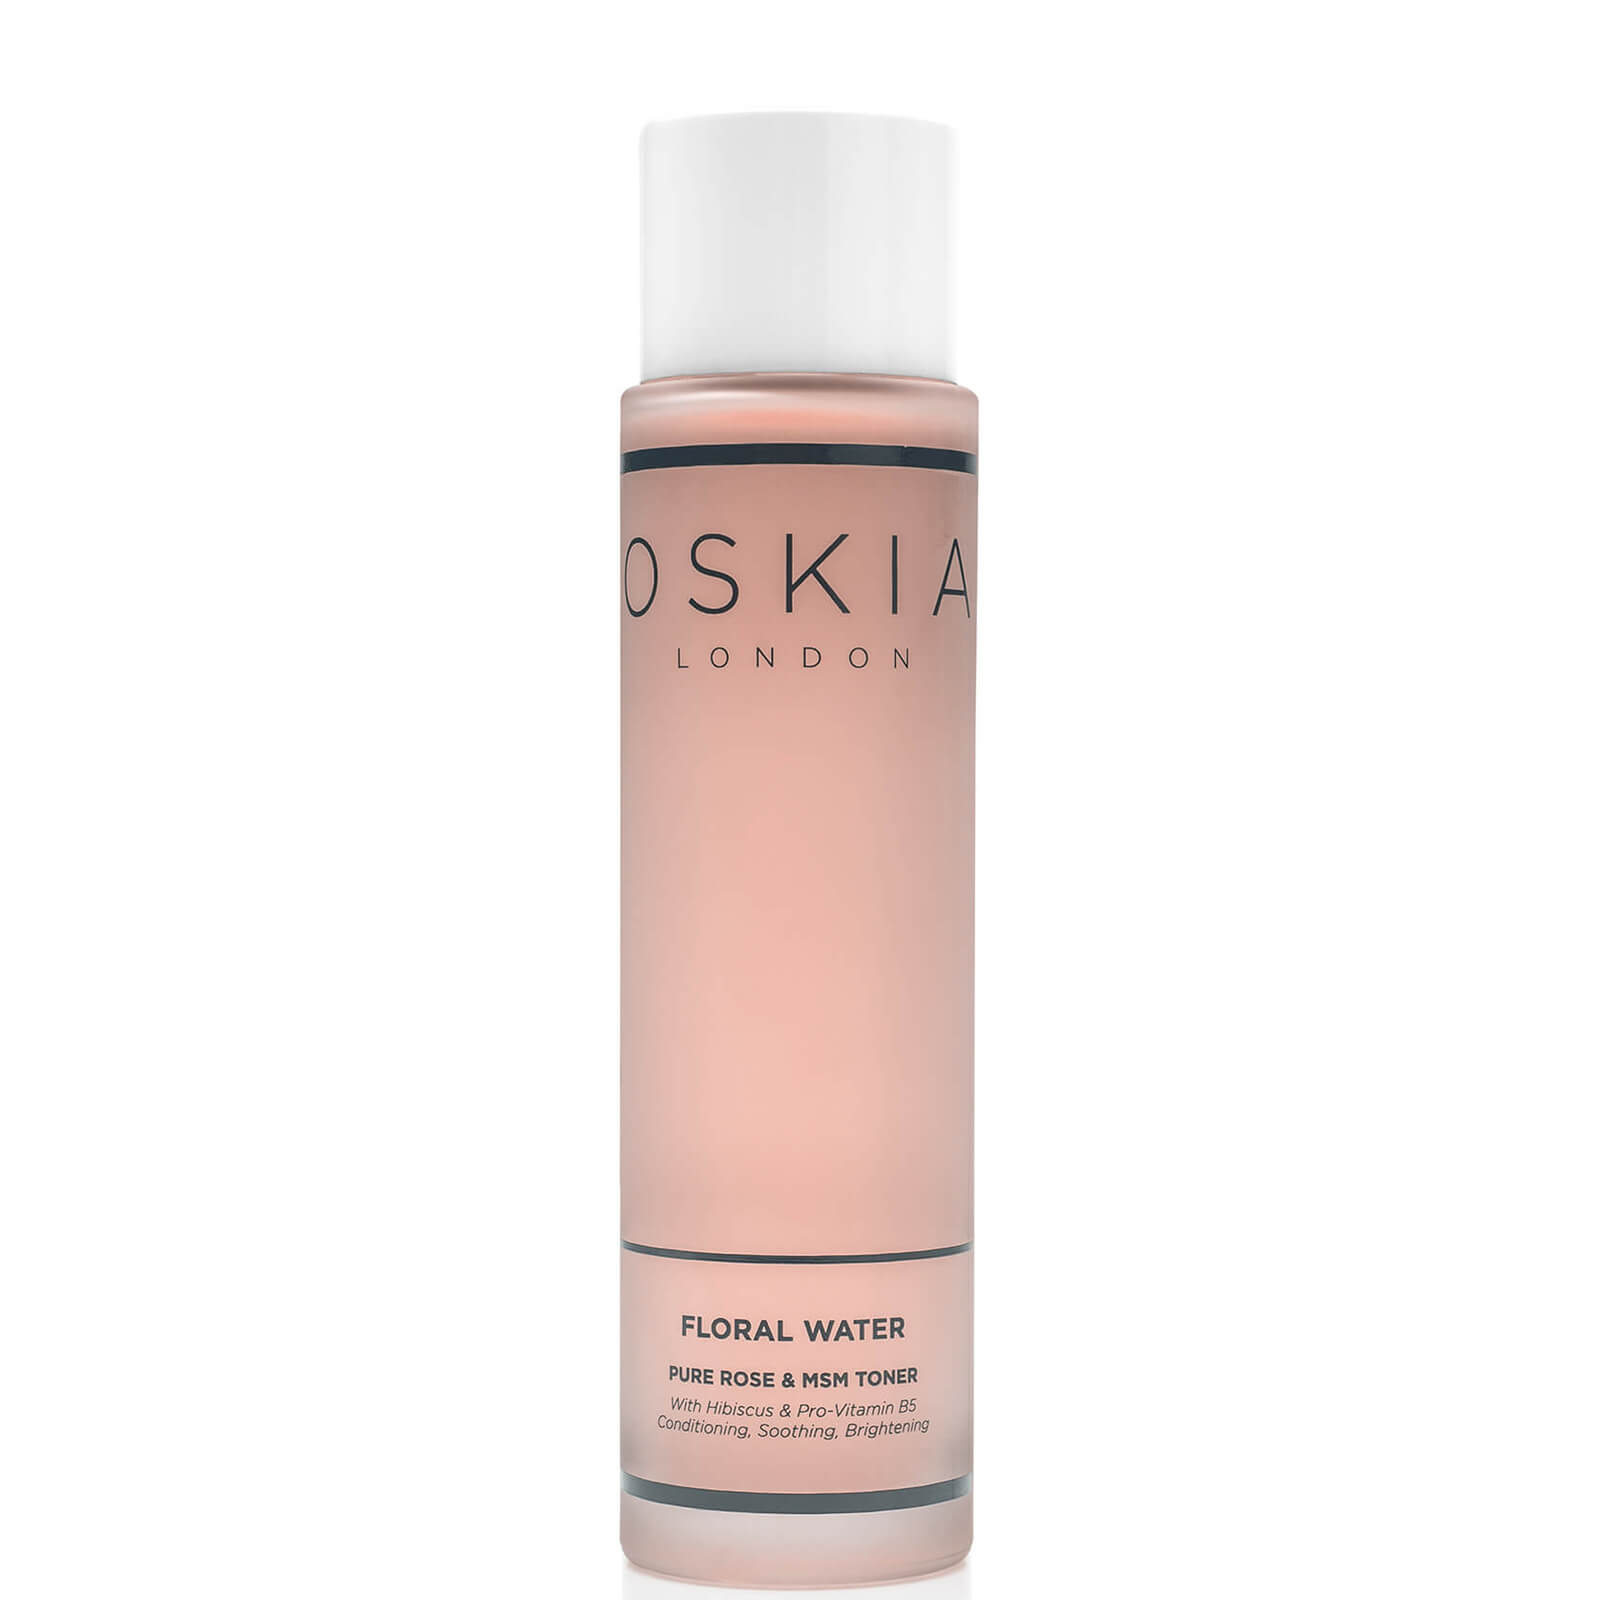 Image of OSKIA Floral Water Toner